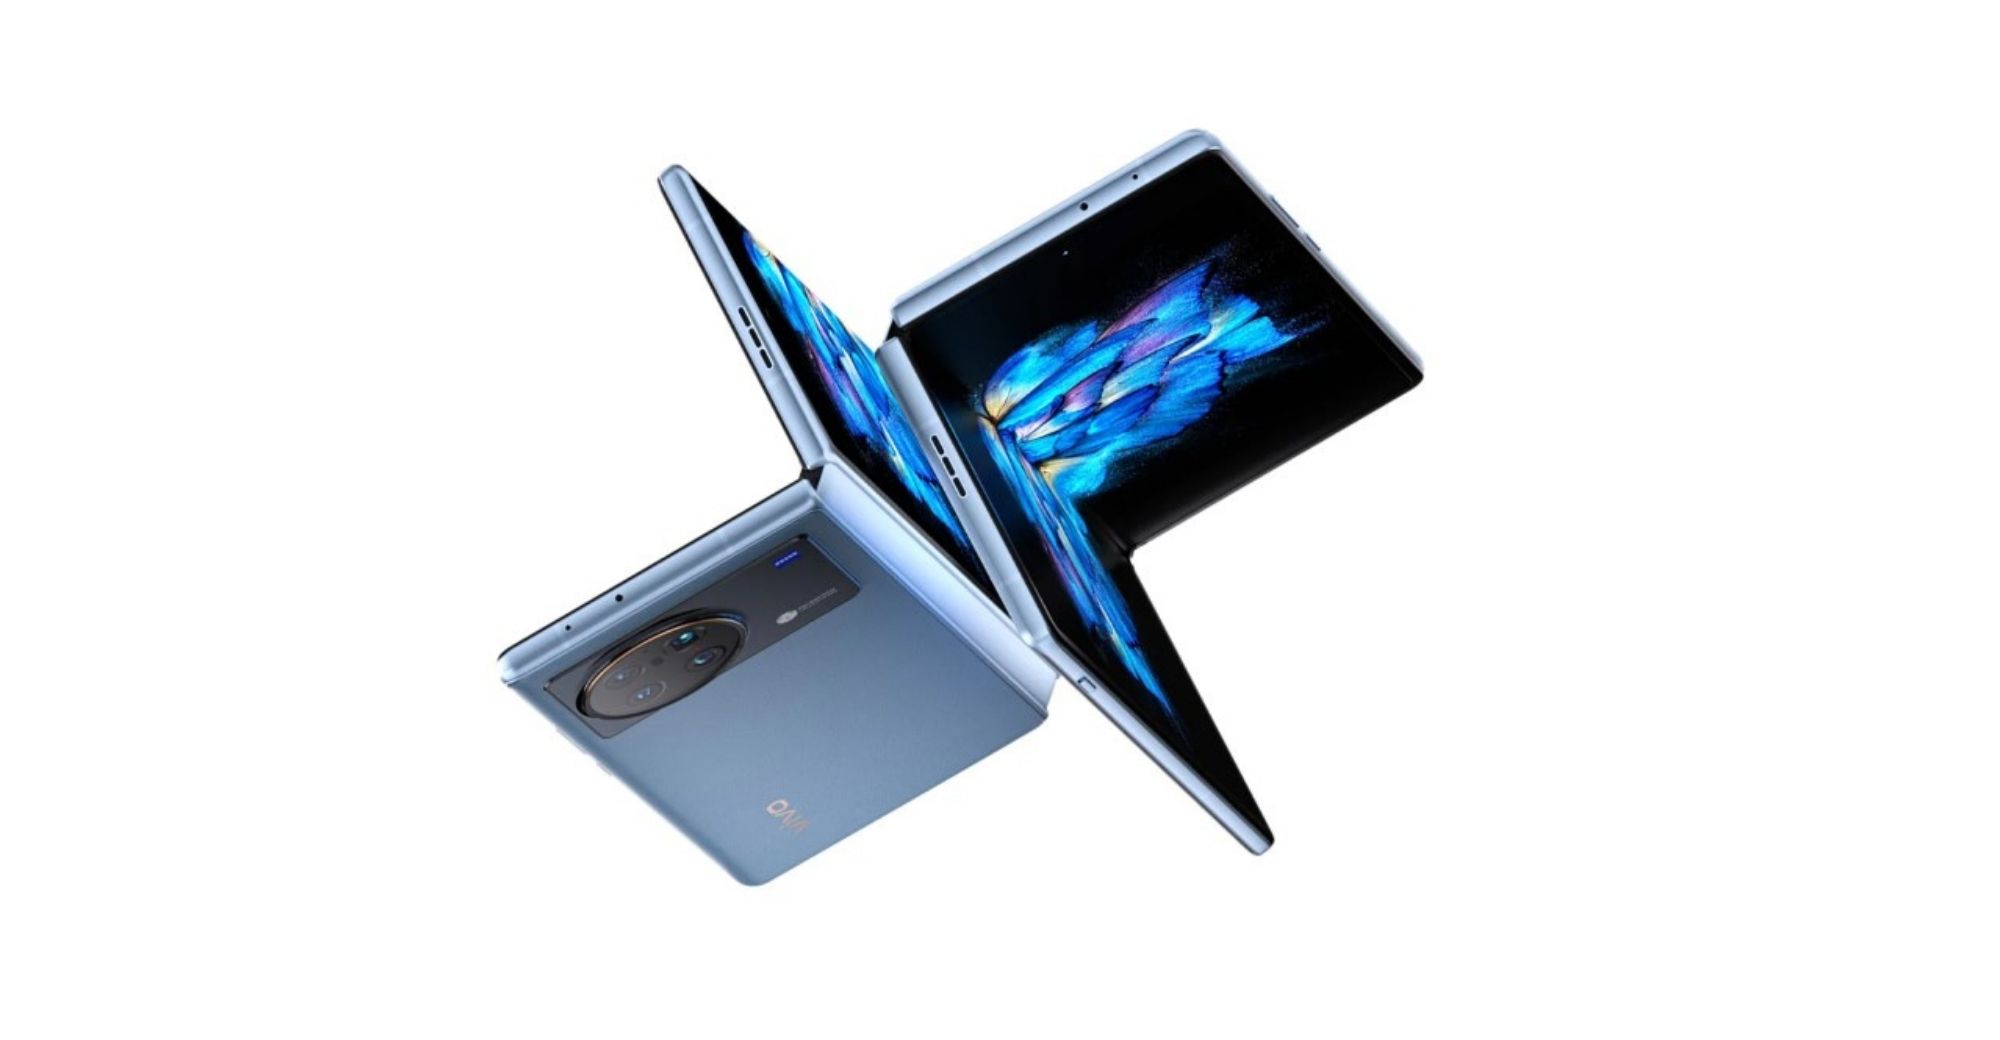 Vivo launched its first foldable phone VIVO X FOLD with Snapdragon 8 Gen 1 chip in China